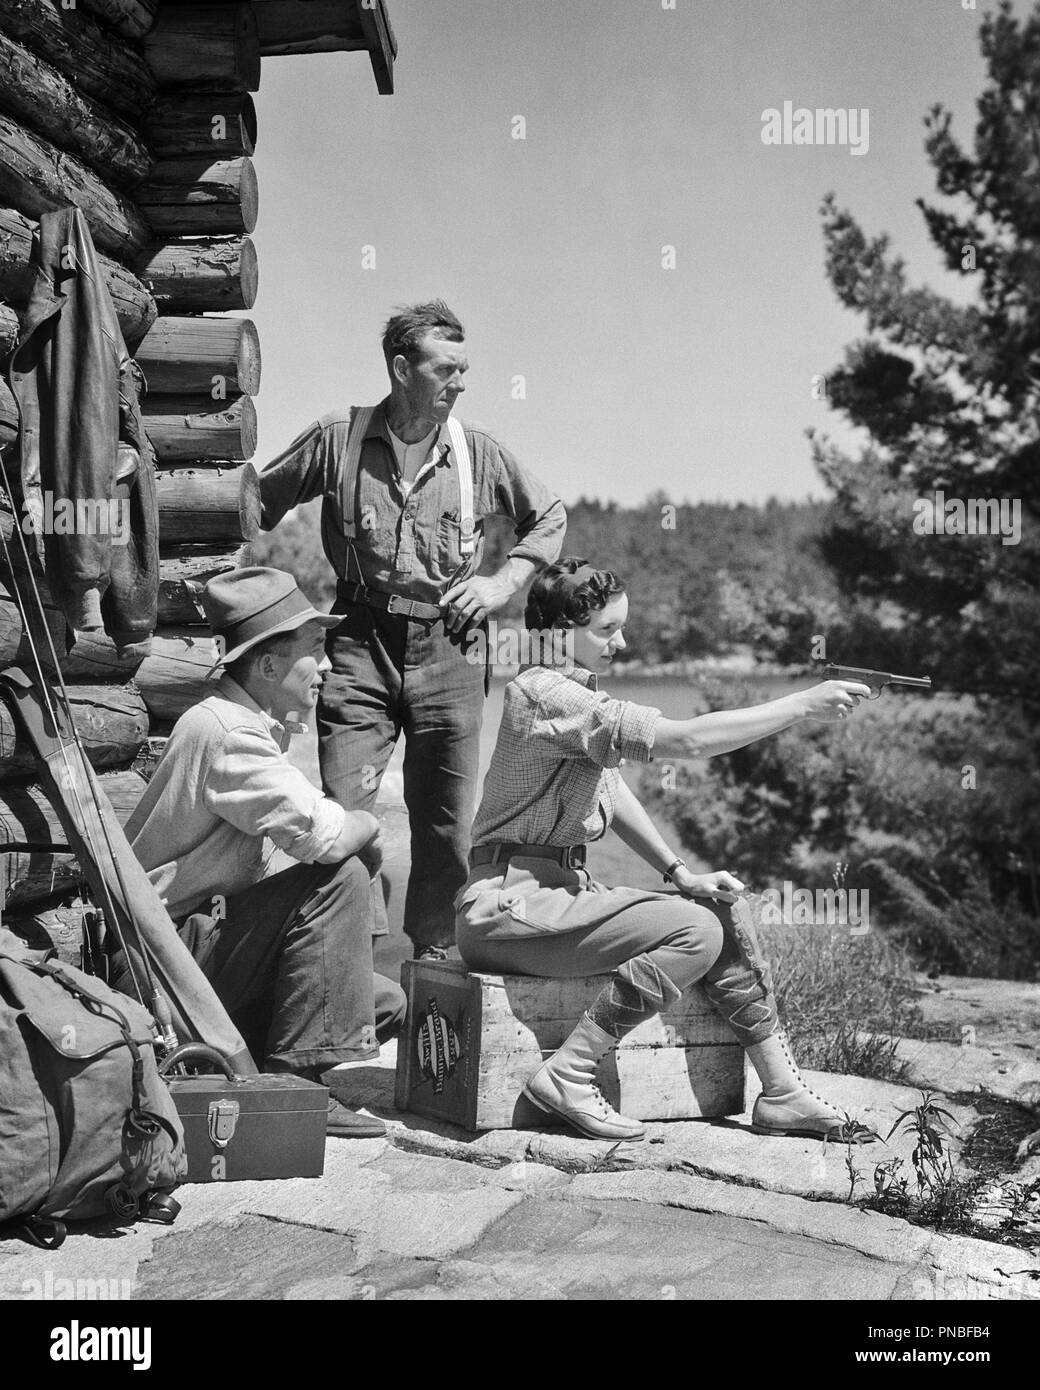 1930s TWO MEN CAMP GUIDES WATCHING INSTRUCTING YOUNG WOMAN SHOOTING 22 CALIBER PISTOL OUTSIDE RUSTIC MOUNTAIN LOG CABIN - a5518 HAR001 HARS FEMALES RURAL FULL-LENGTH LADIES PERSONS MALES CONFIDENCE B&W TIME OFF RUSTIC ADVENTURE LEISURE PROTECTION STRENGTH GETAWAY CHOICE INSTRUCTOR KNOWLEDGE POWERFUL DIRECTION PRIDE AUTHORITY FIRING HOLIDAYS INSTRUCTING CONNECTION CONCEPTUAL INSTRUCTION GUIDE GUIDES STYLISH AIMING FIREARM FIREARMS MID-ADULT MID-ADULT MAN MID-ADULT WOMAN PISTOL RELAXATION VACATIONS YOUNG ADULT WOMAN BLACK AND WHITE CAUCASIAN ETHNICITY HAR001 LOG CABIN OLD FASHIONED Stock Photo